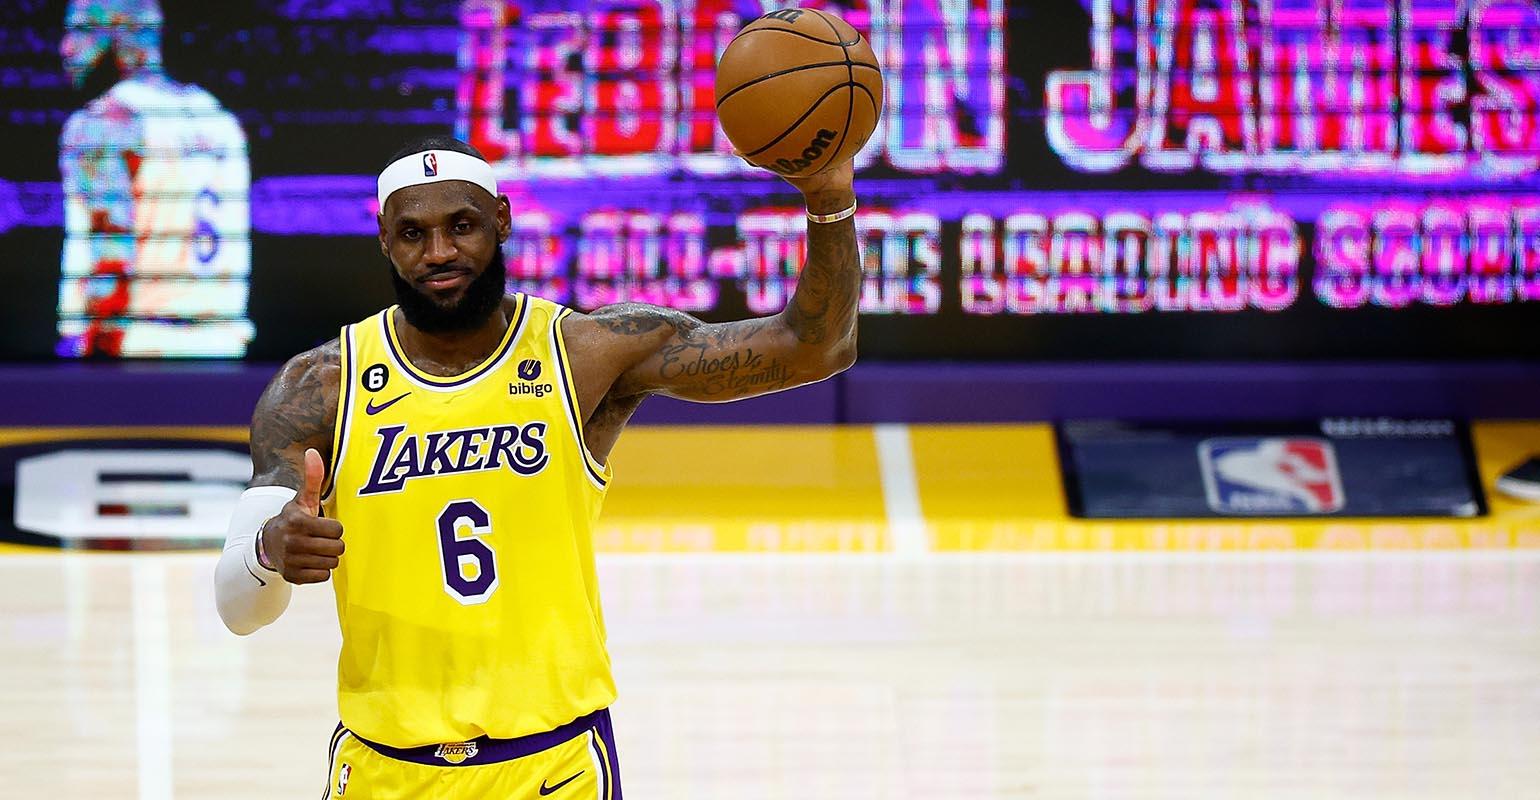 LeBron Is All-Time Scoring Leader—and a Billionaire | Wealth Management